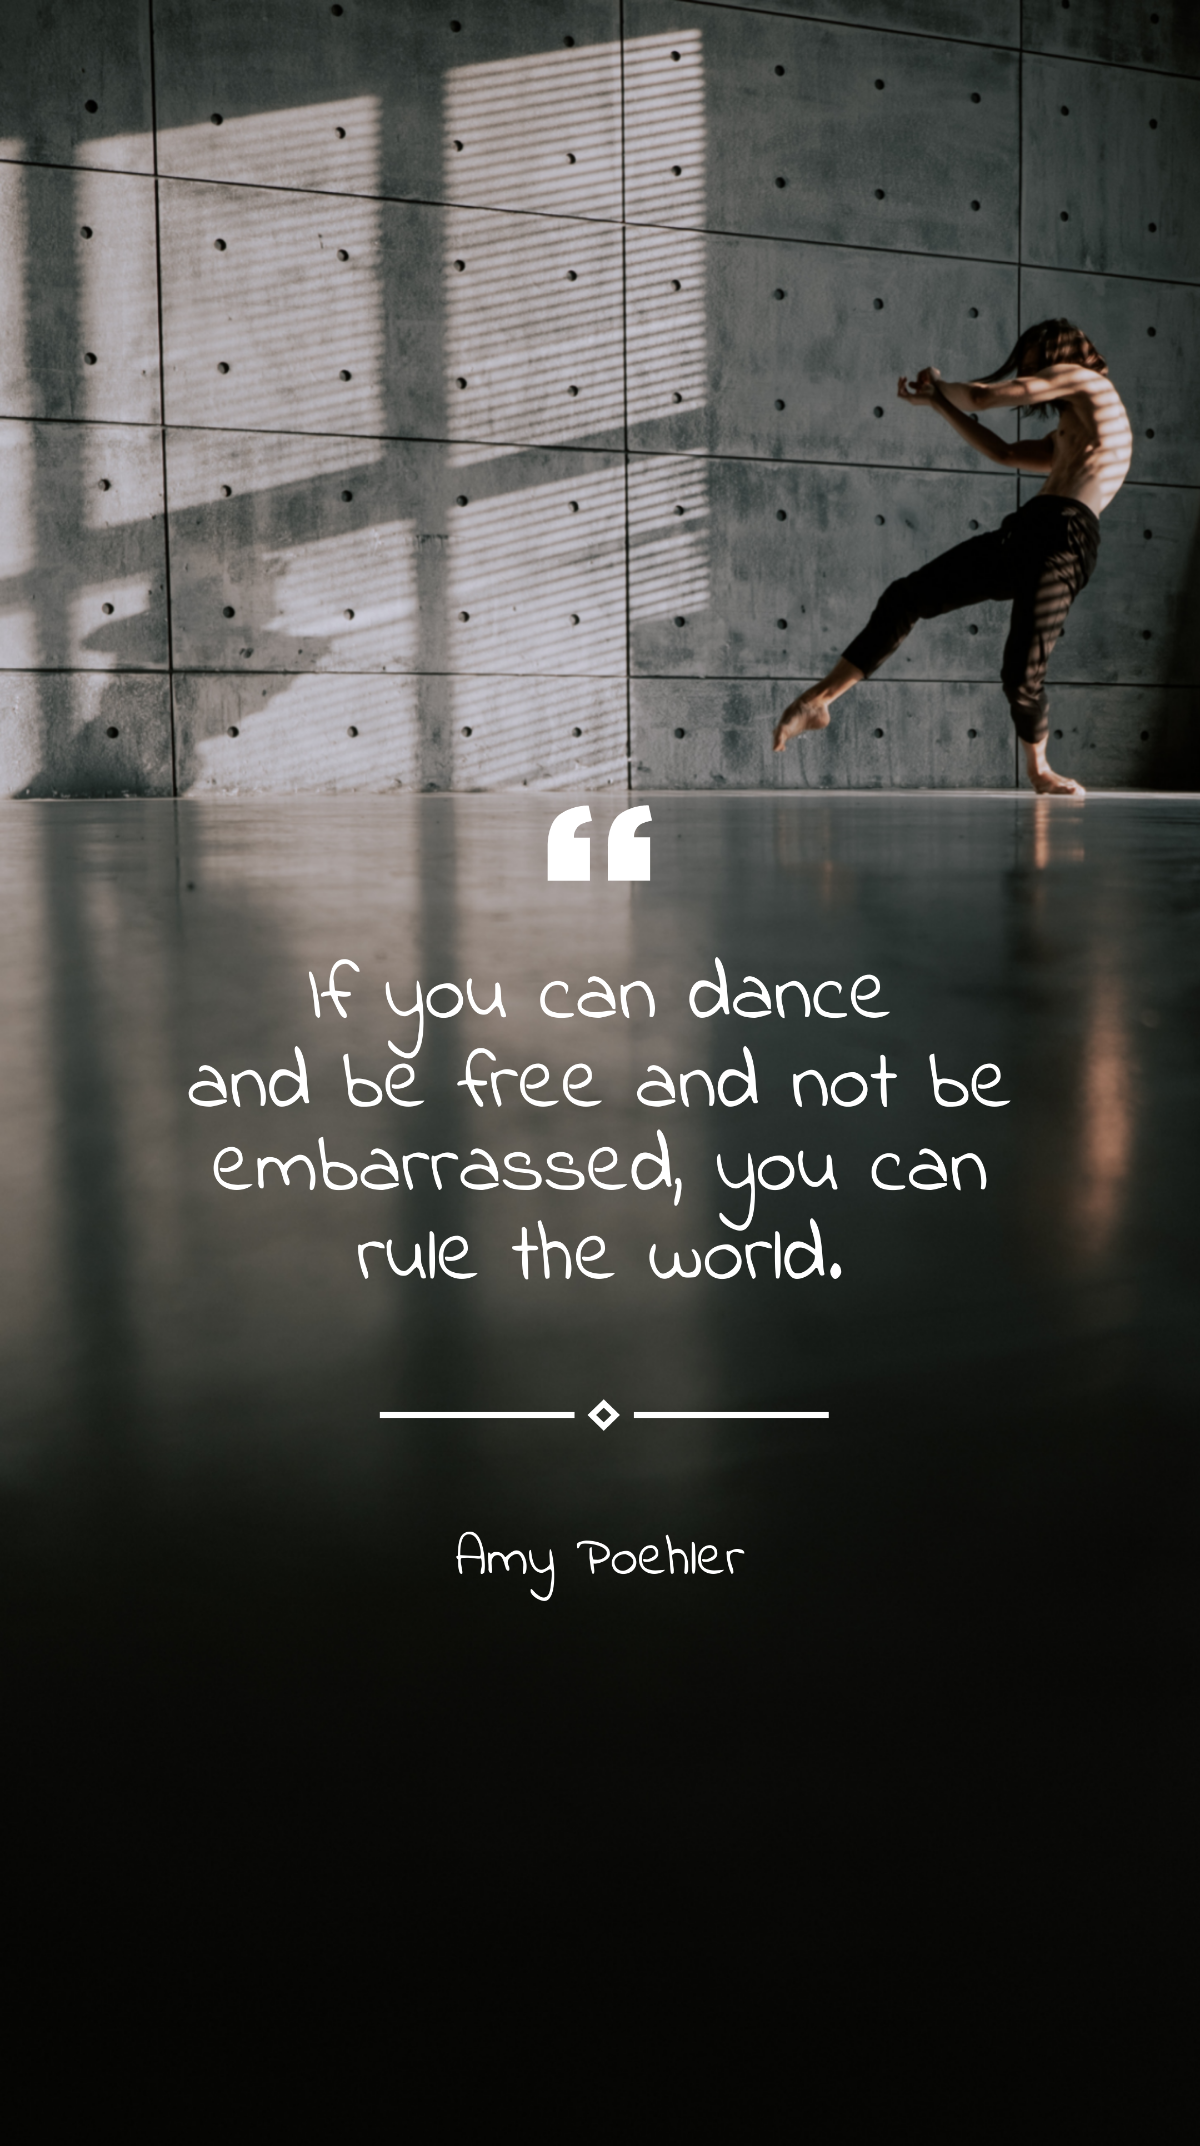 Amy Poehler - “If you can dance and be and not be embarrassed, you can rule the world.” Template